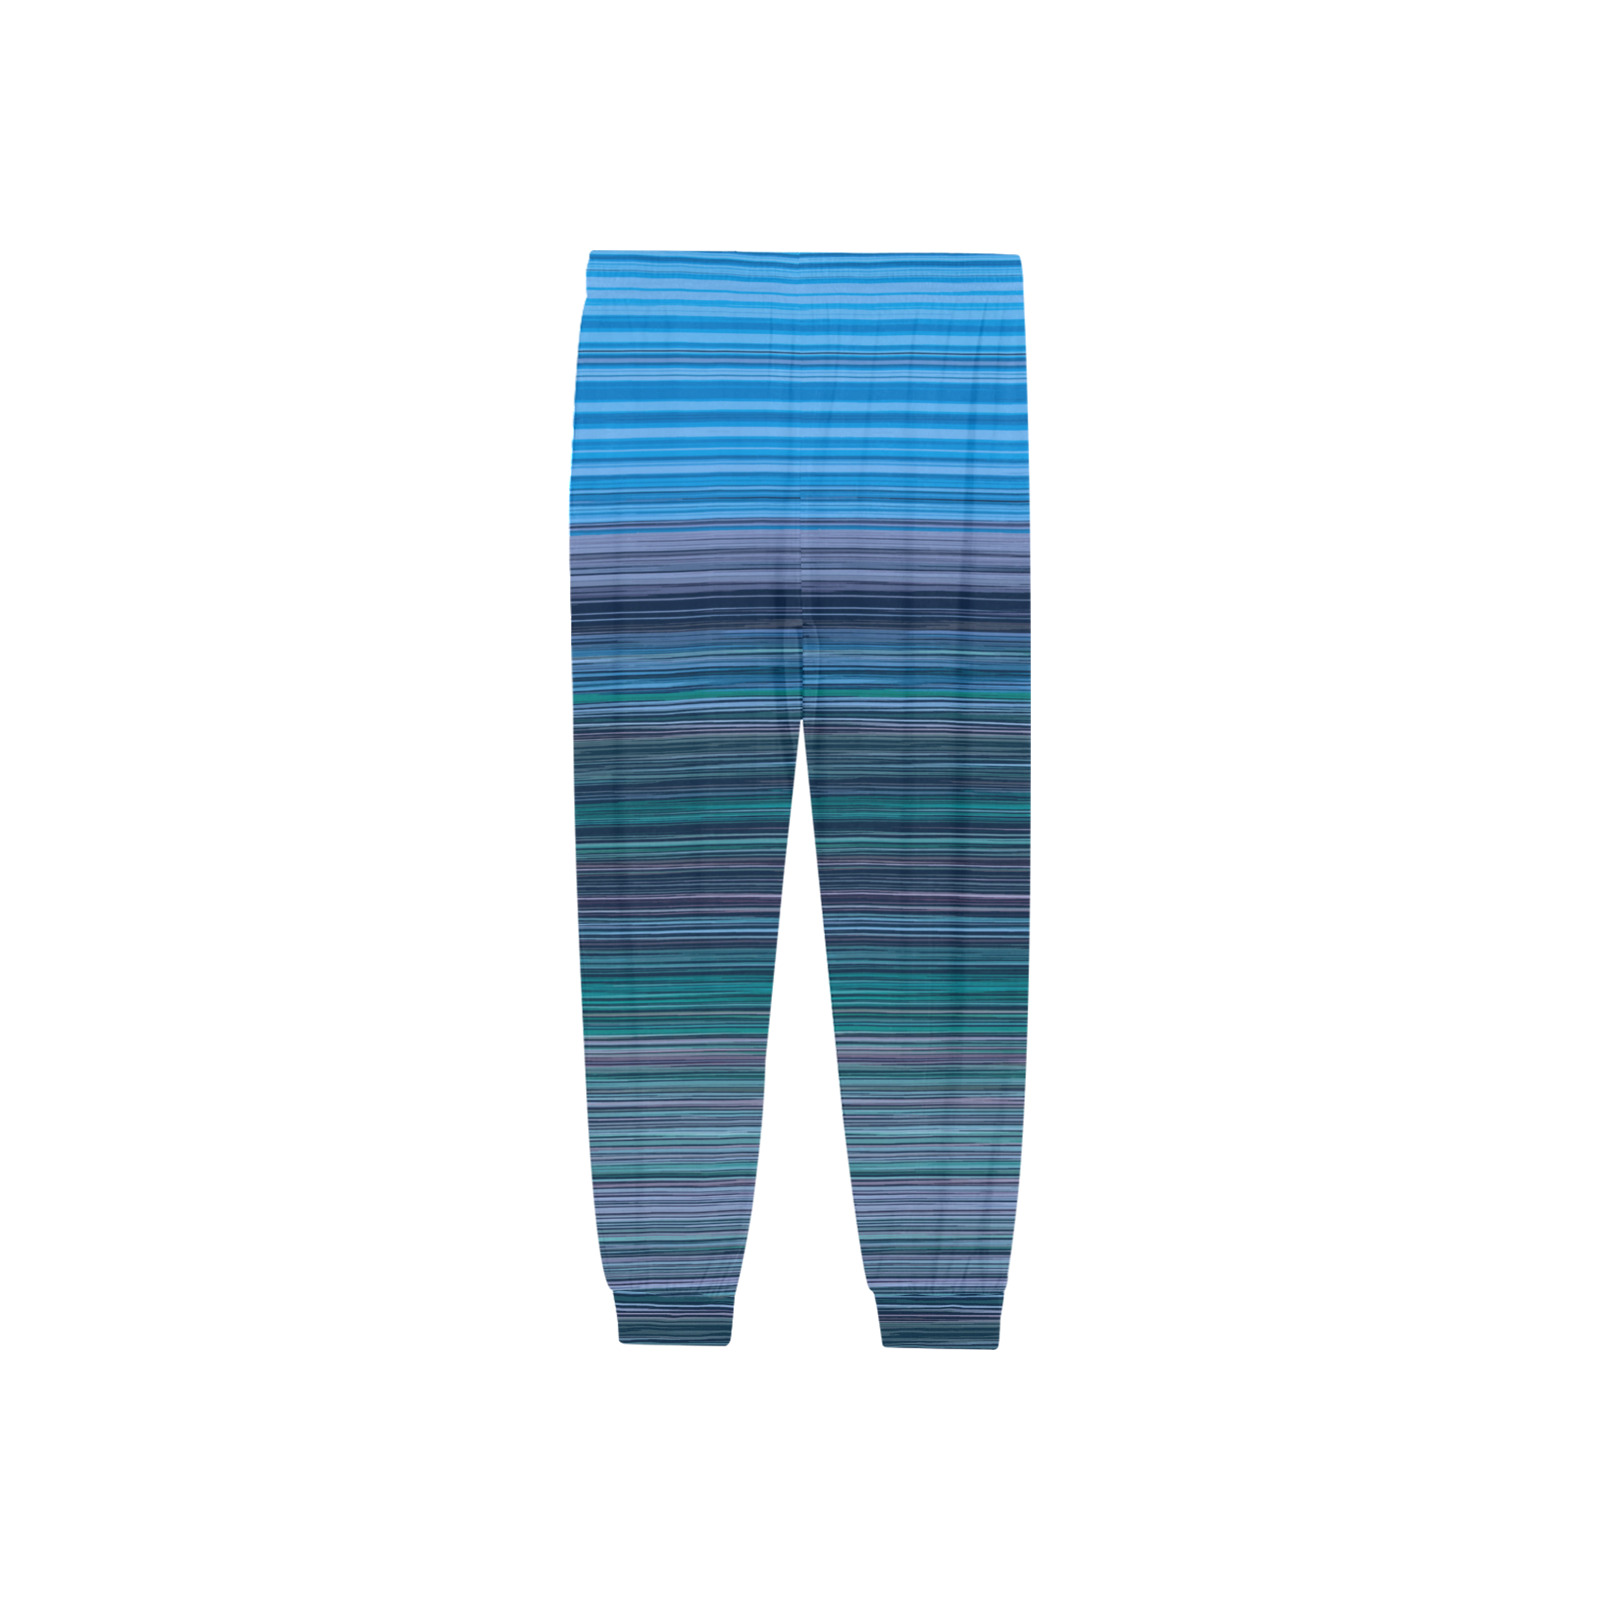 Abstract Blue Horizontal Stripes Men's Pajama Trousers with Custom Cuff